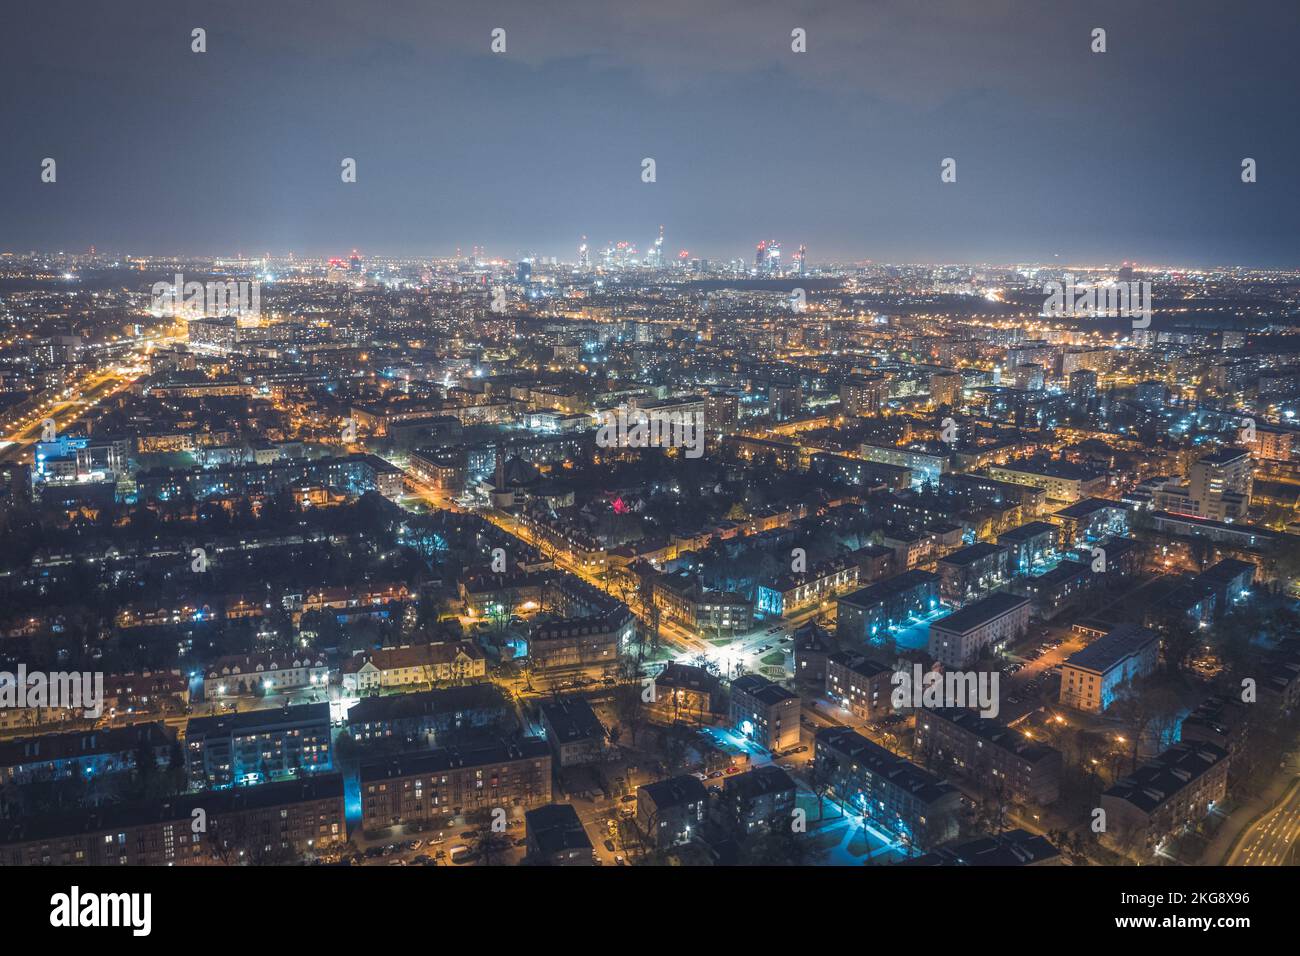 Warsaw by night, aerial landscape of illuminated streets and buildings Stock Photo